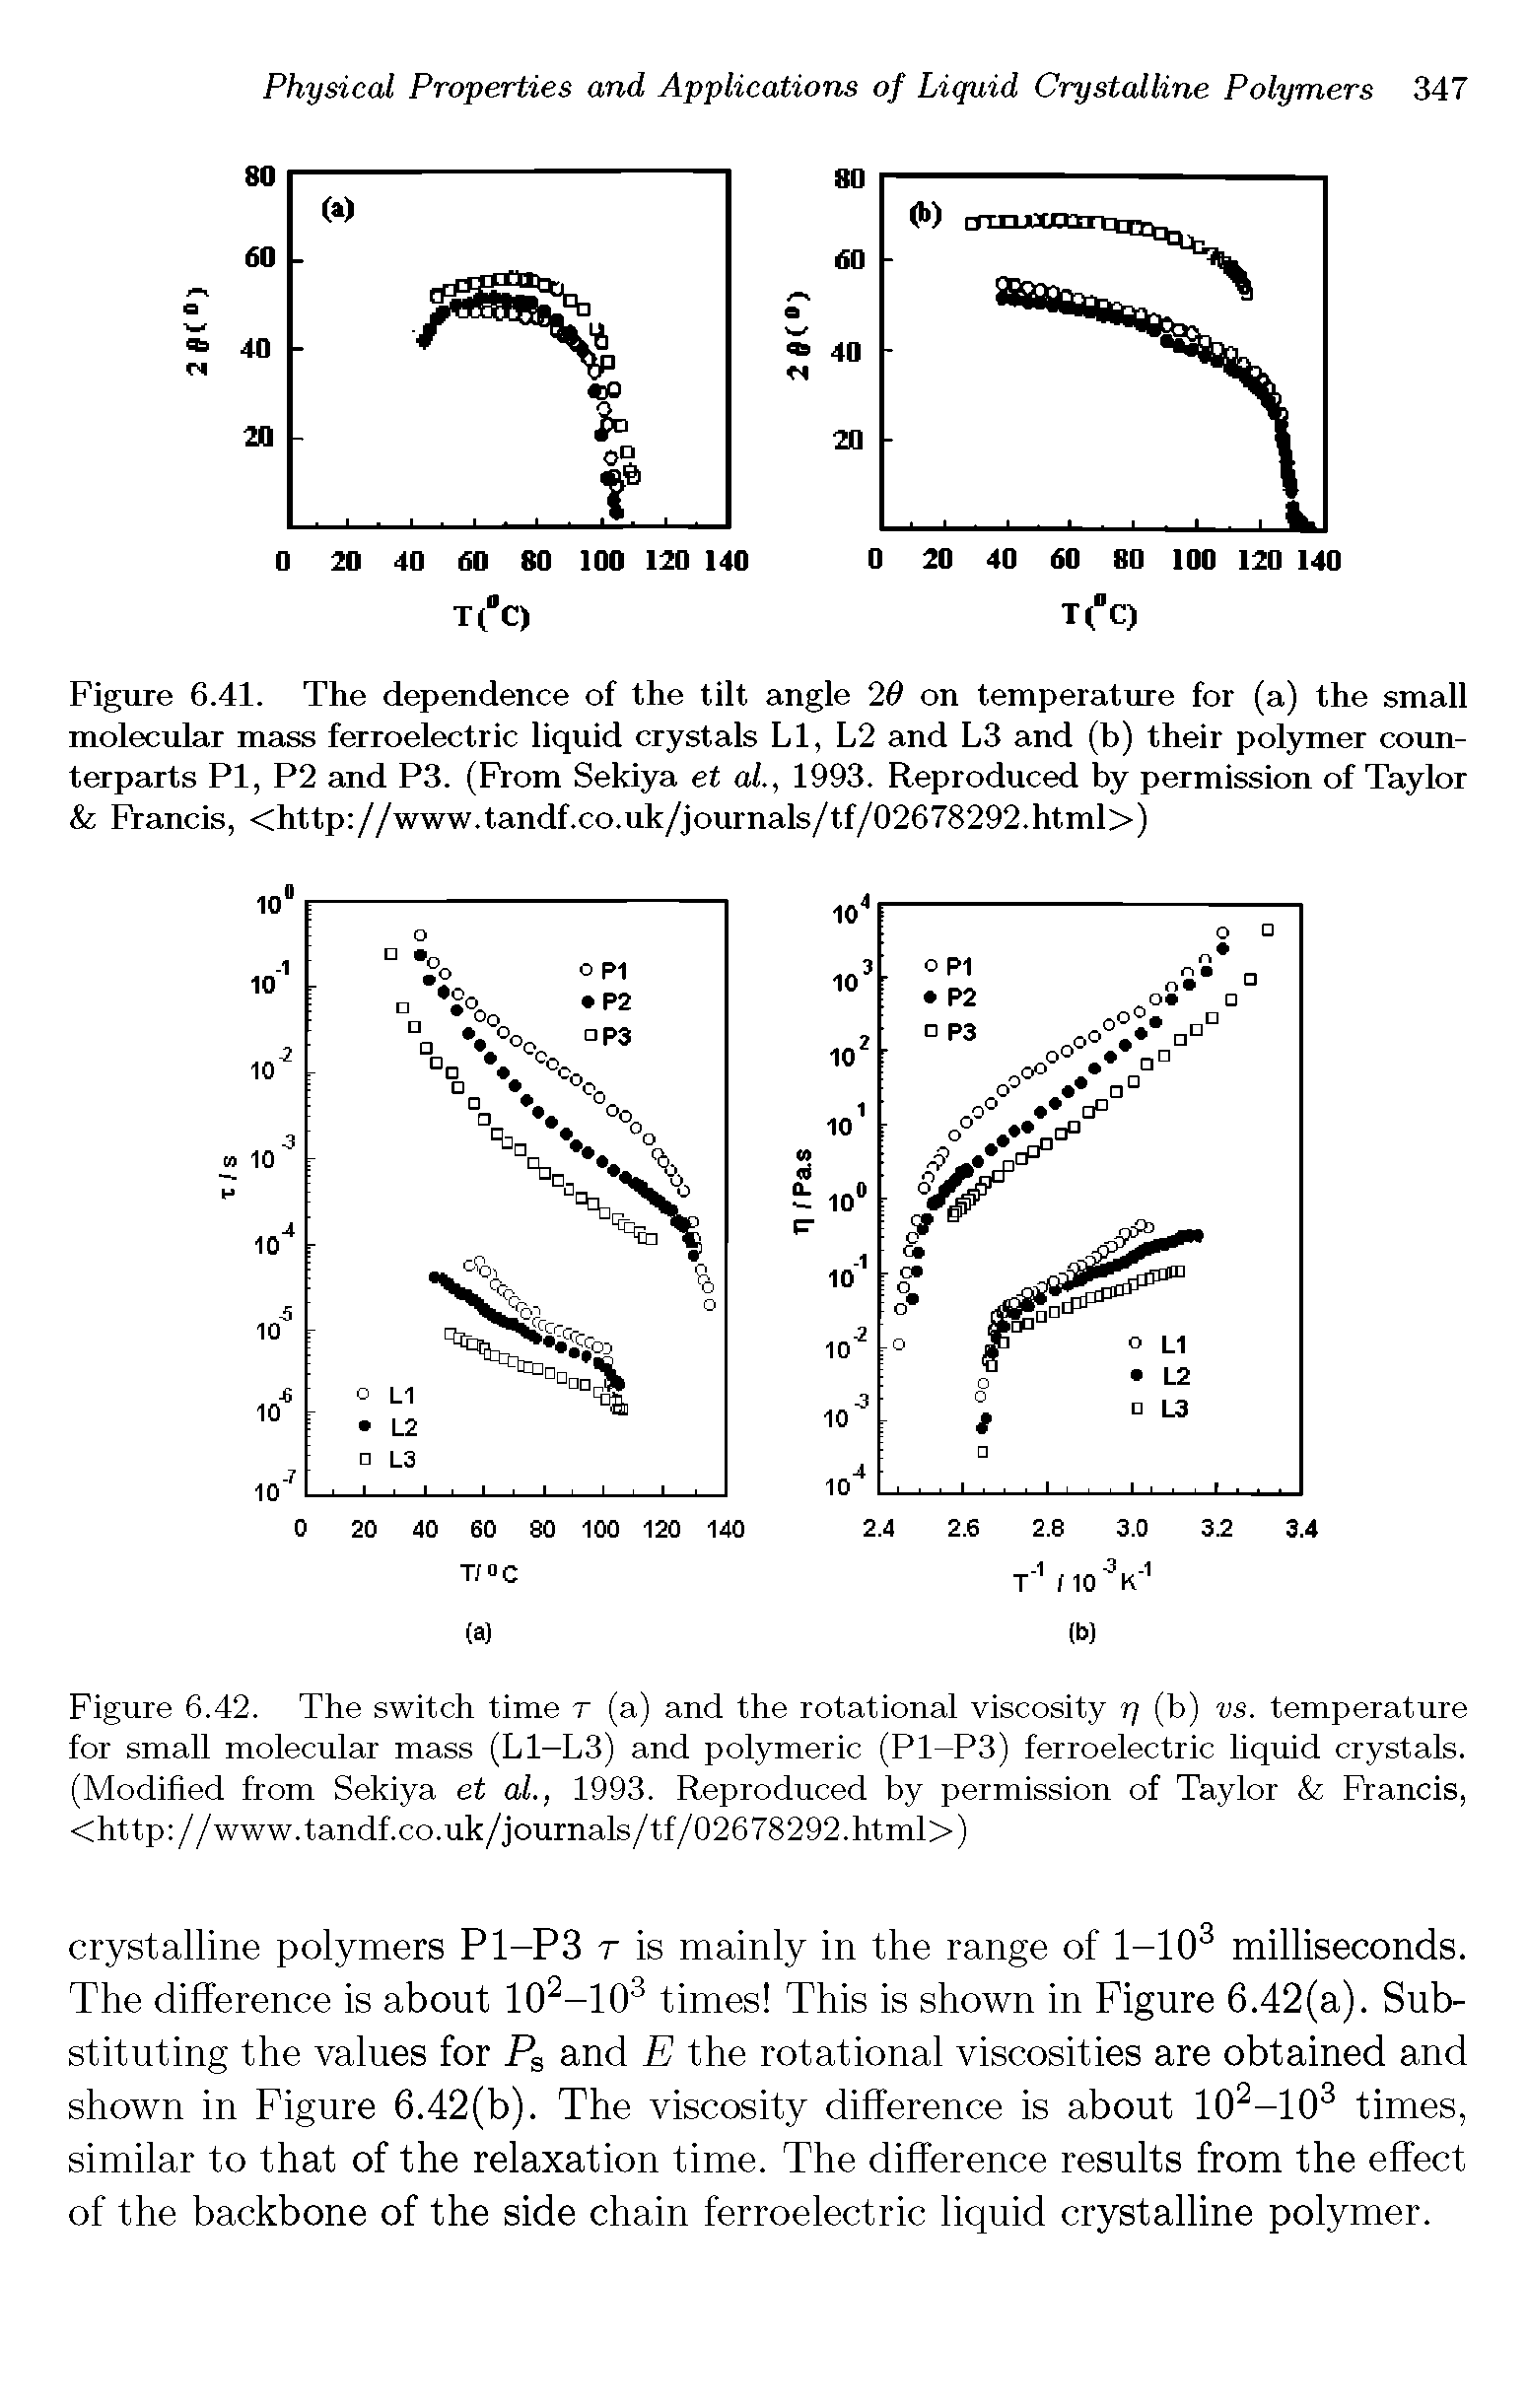 Figure 6.41. The dependence of the tilt angle 20 on temperature for (a) the small molecular mass ferroelectric liquid crystals LI, L2 and L3 and (b) their polymer counterparts PI, P2 and P3. (From Sekiya et al., 1993. Reproduced by permission of Taylor Francis, <http //www.tandf.co.uk/journals/tf/02678292.html>)...